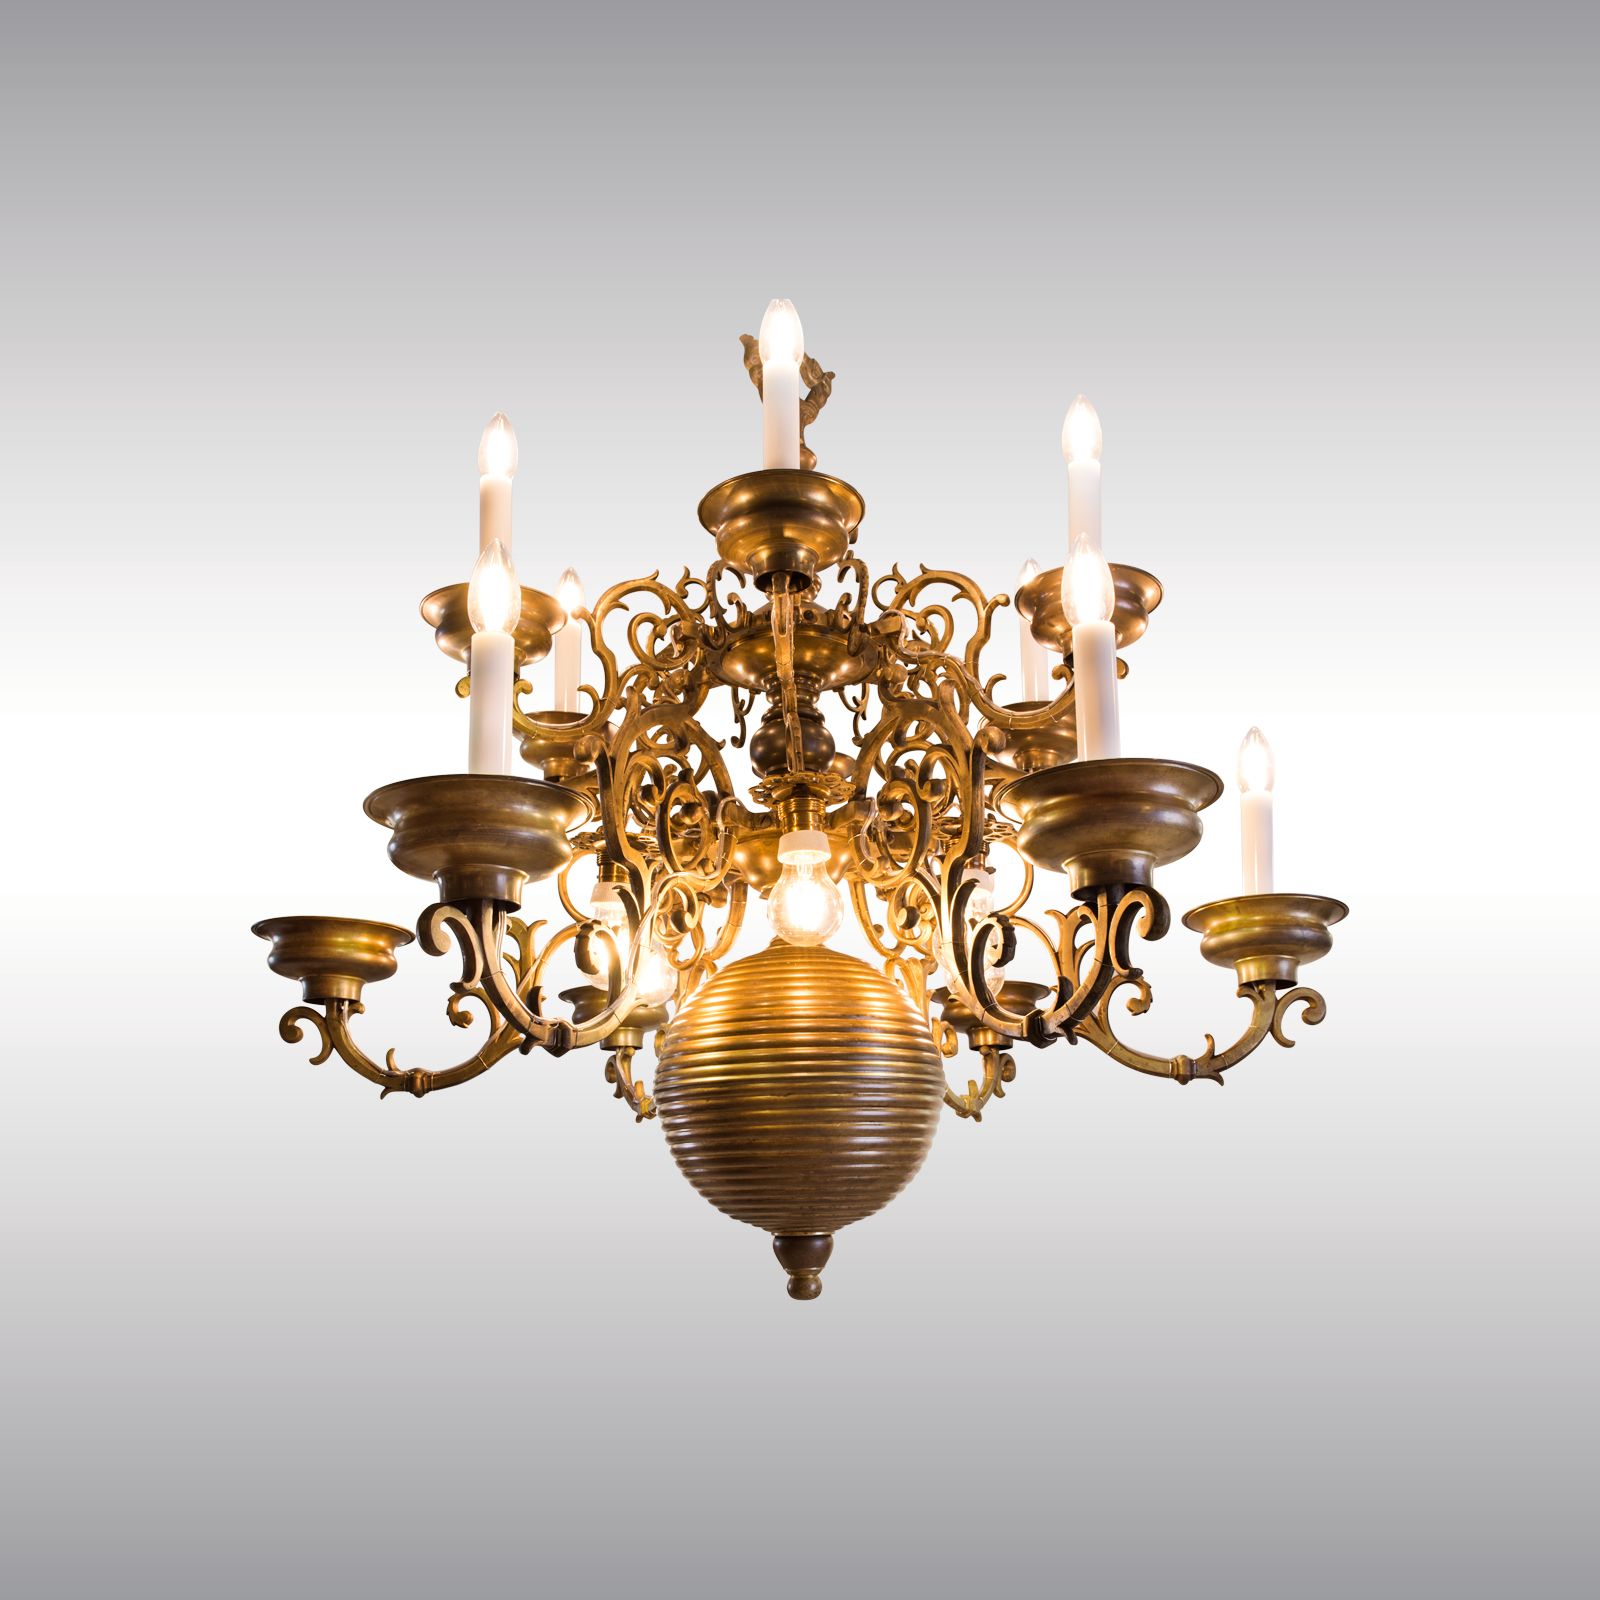 WOKA LAMPS VIENNA - OrderNr.: 80060|Flemish Baroque Chandelier late 19th - Design: The Ringstrasse-Style in Vienna